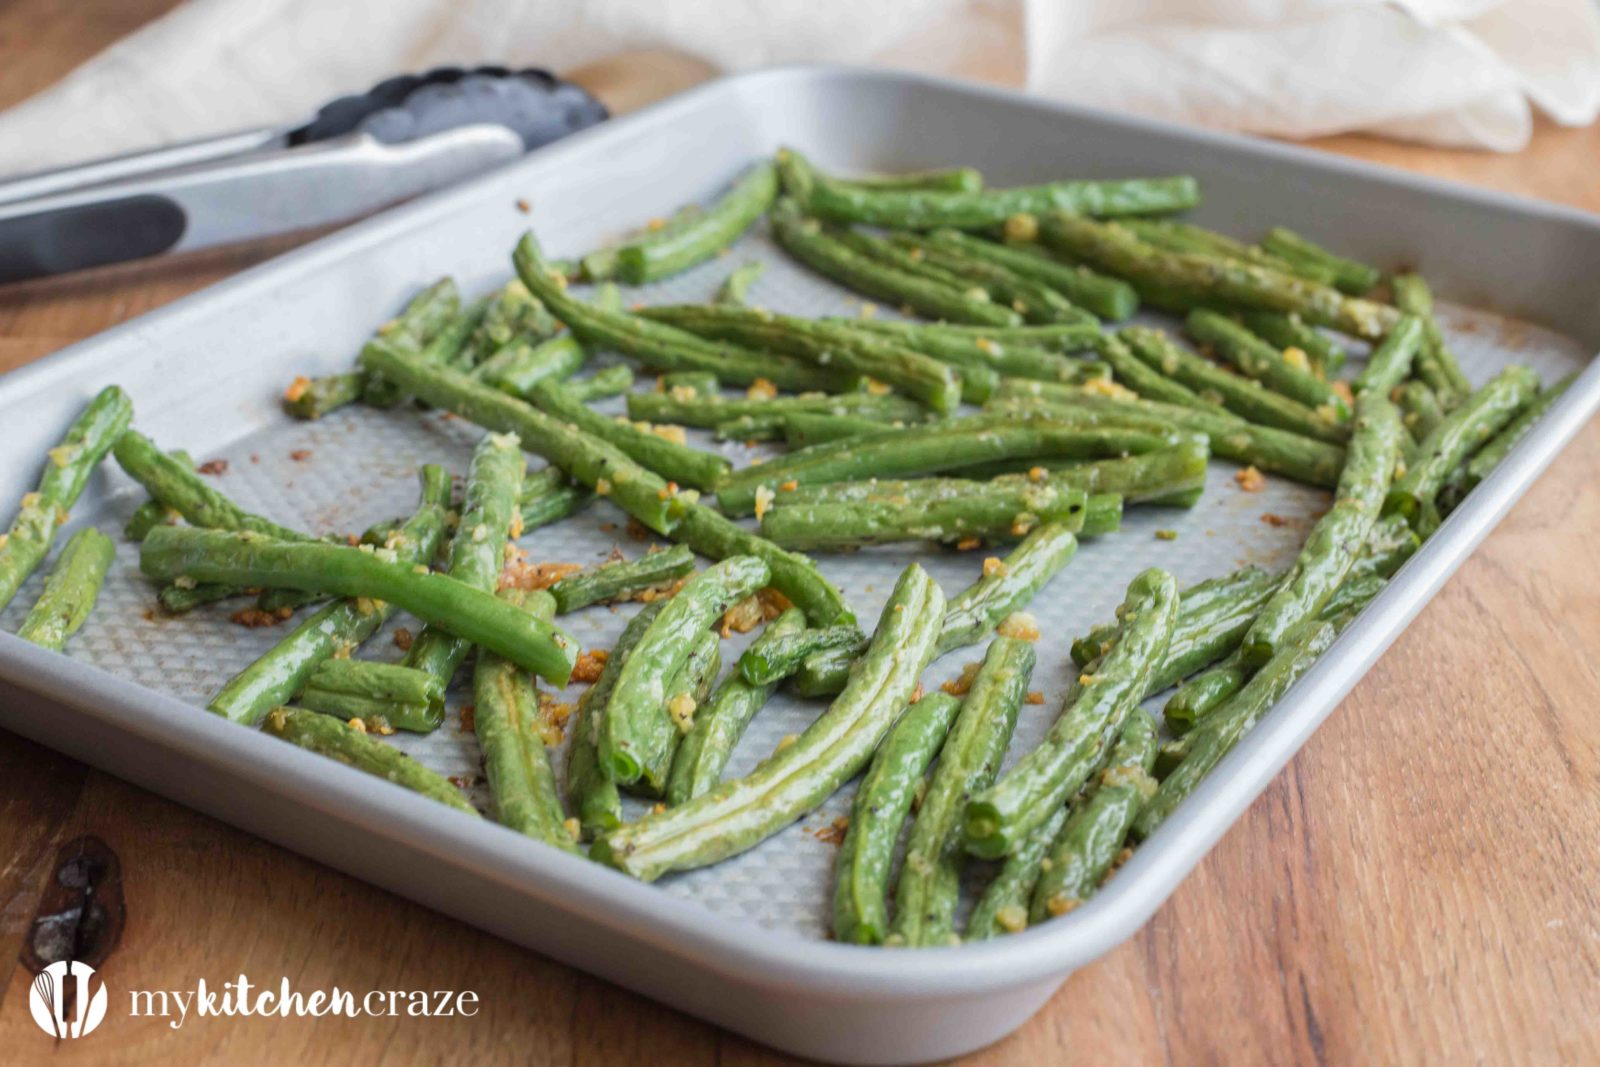 Baked Garlic Green Beans are a simple and delicious side dish that will compliment any main entree. Crunchy green beans and roasted garlic, make this one easy yummy side!